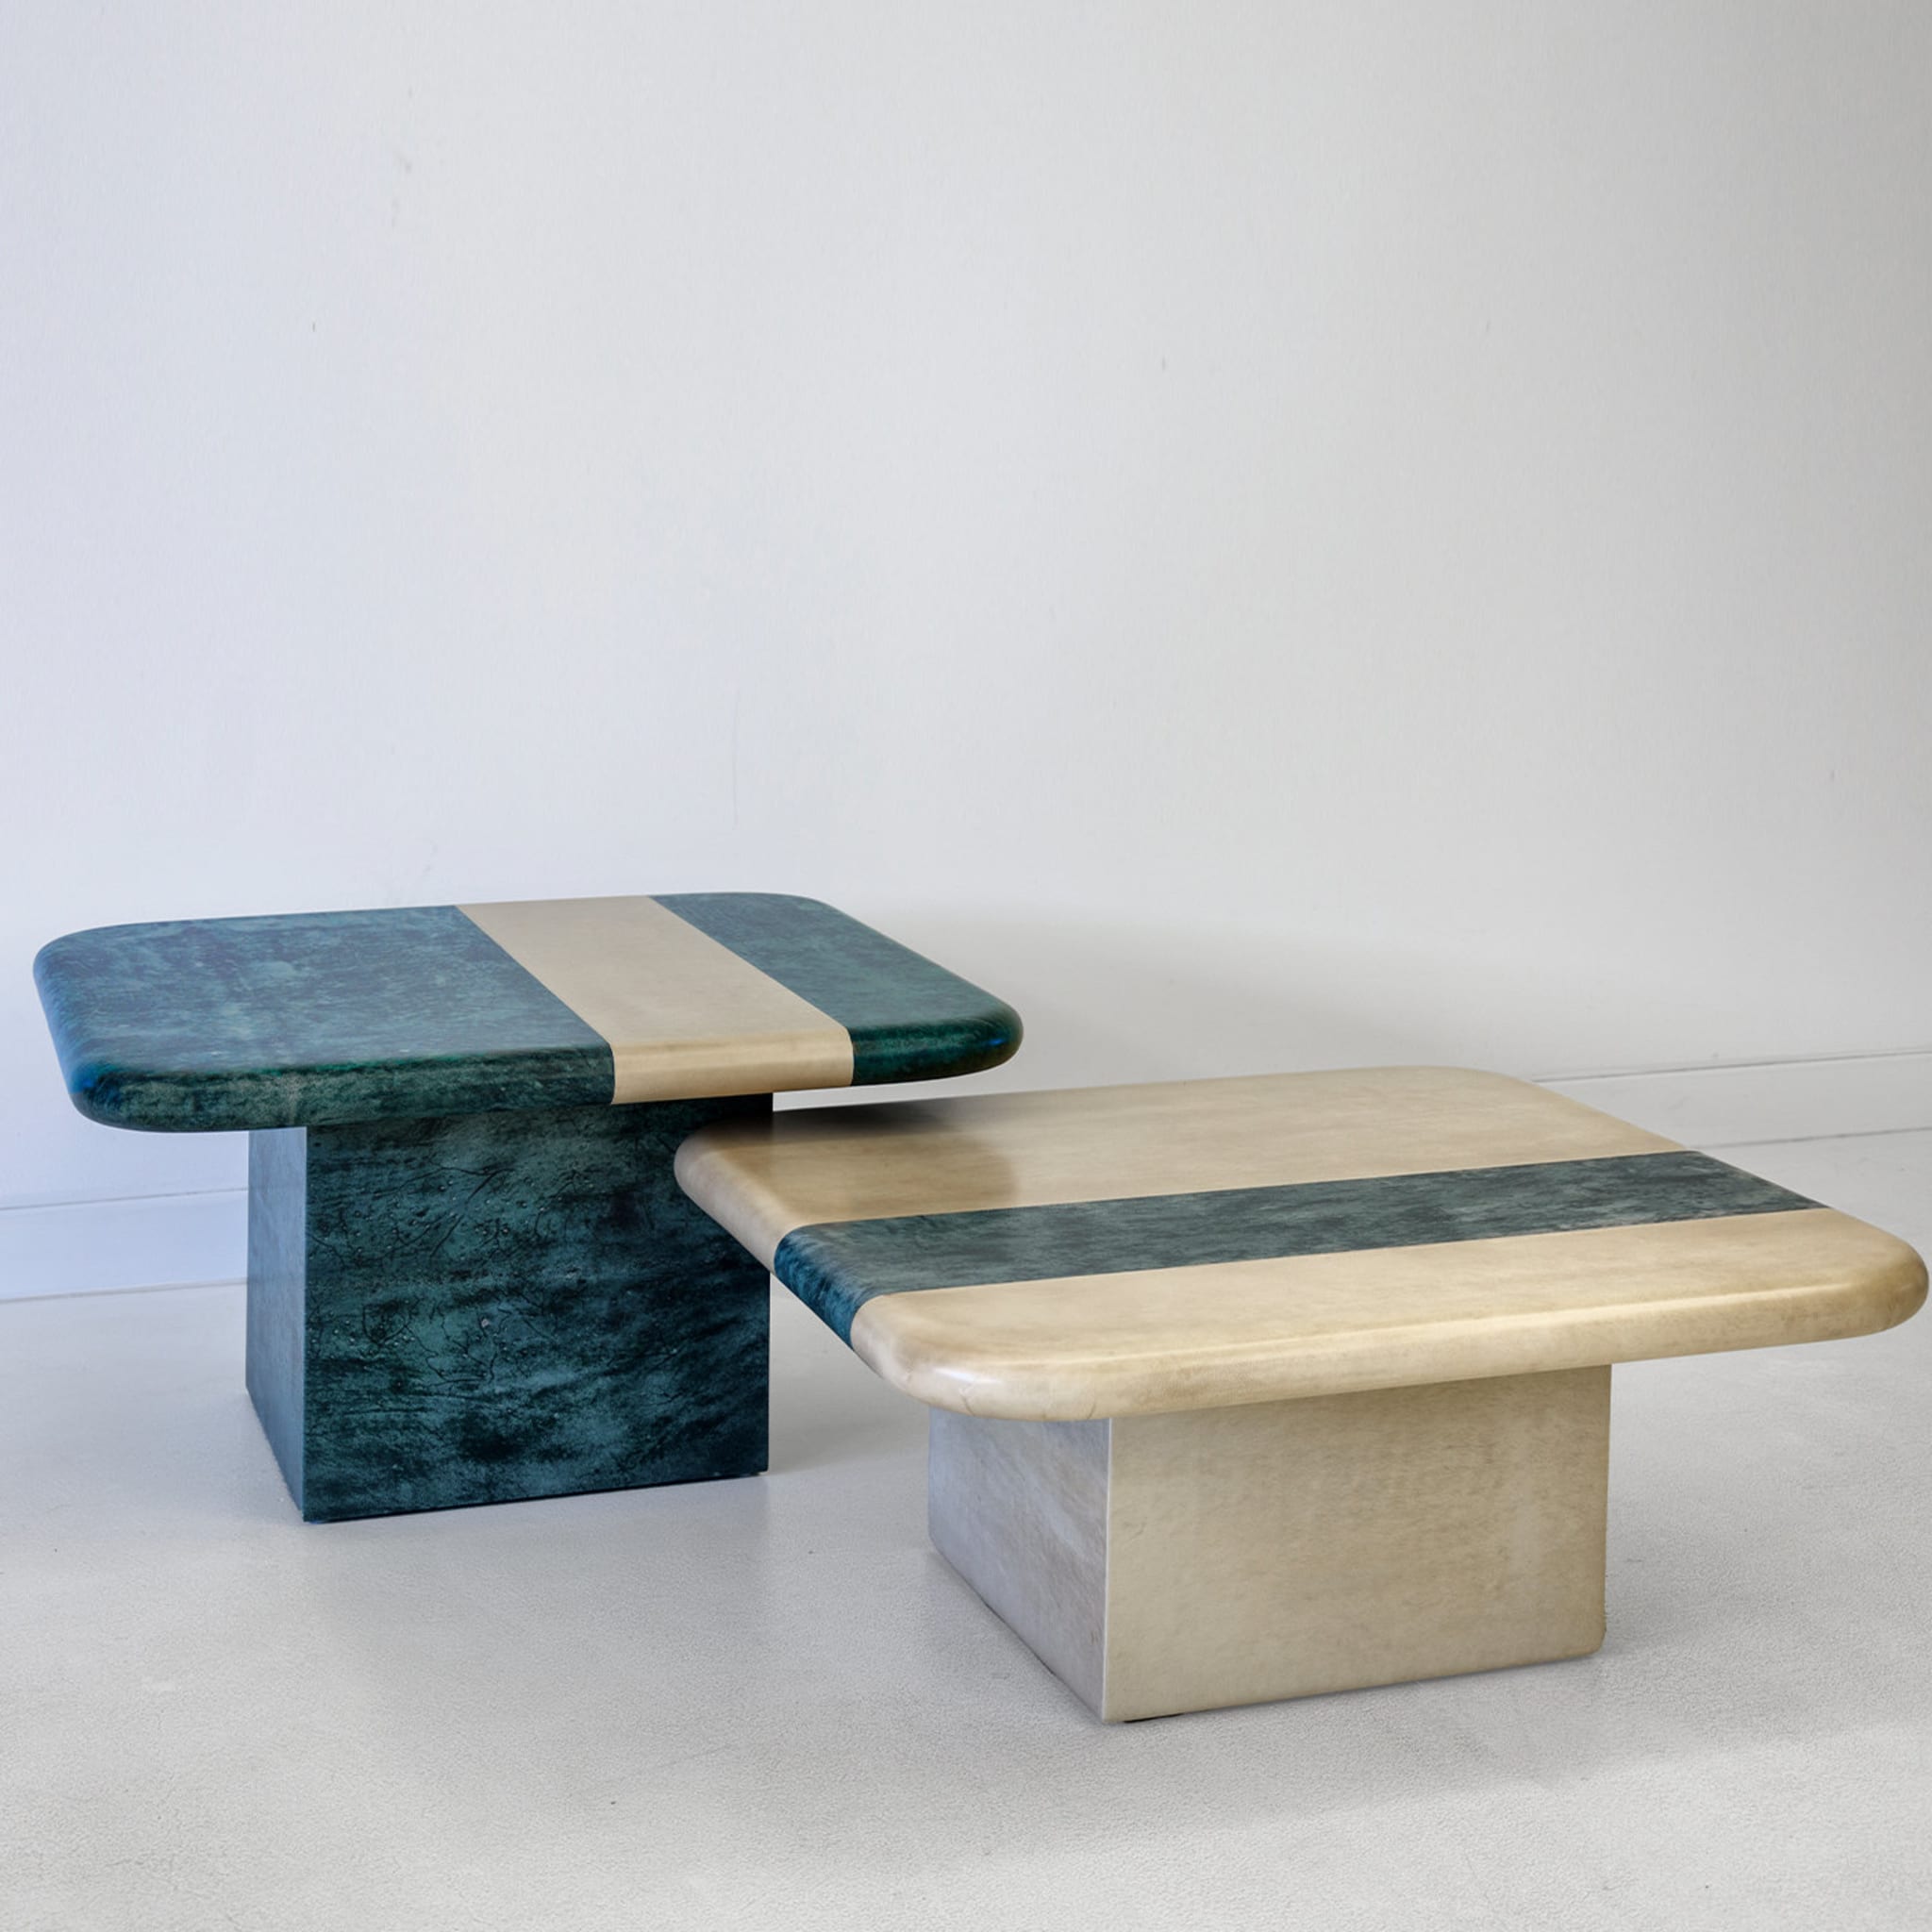 Set of 2 Green and Sand Nesting Tables  - Alternative view 1